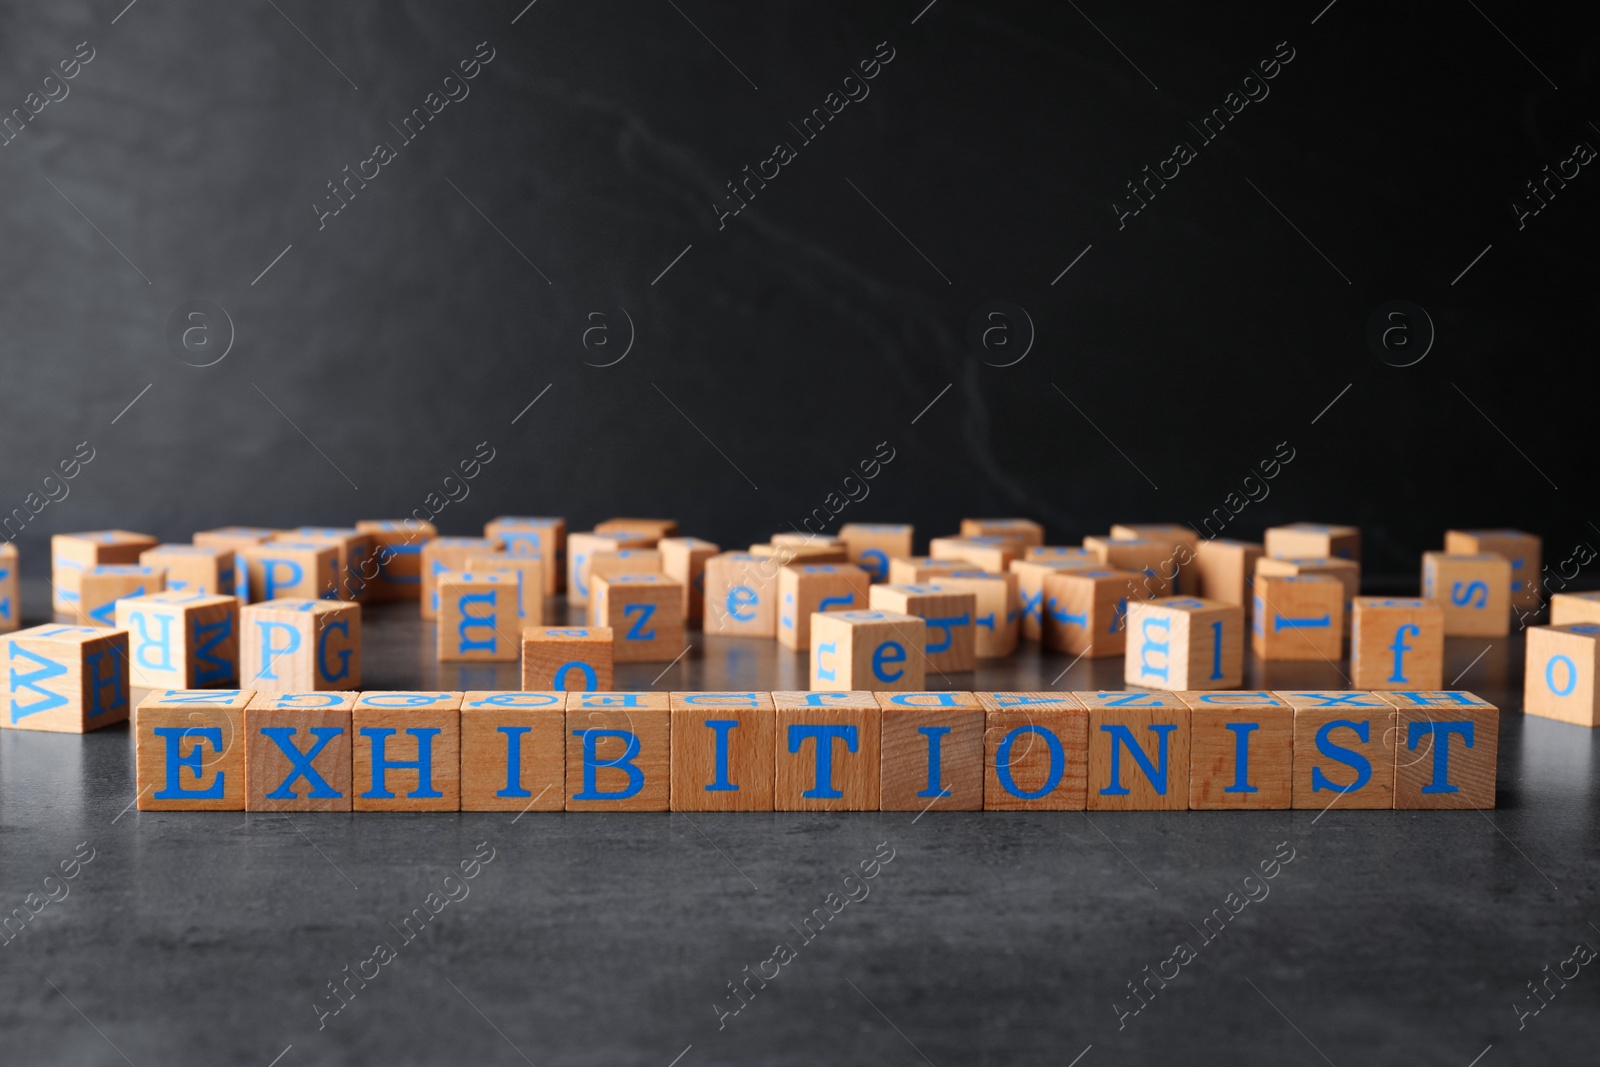 Photo of Word EXHIBITIONIST made with wooden cubes on grey table